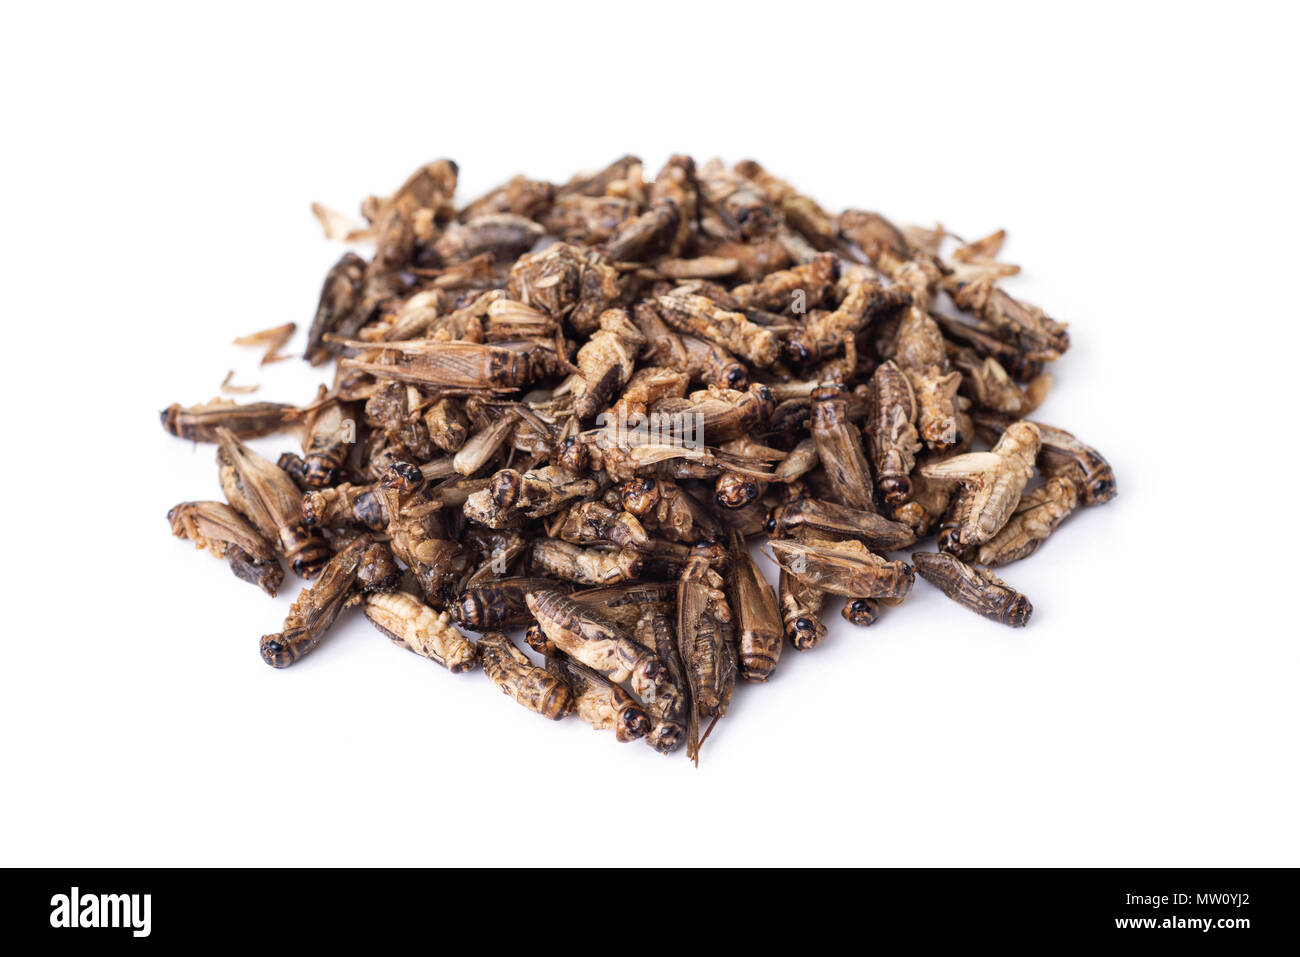 a pile of fried crickets seasoned with onion and barbecue sauce, on a white background Stock Photo